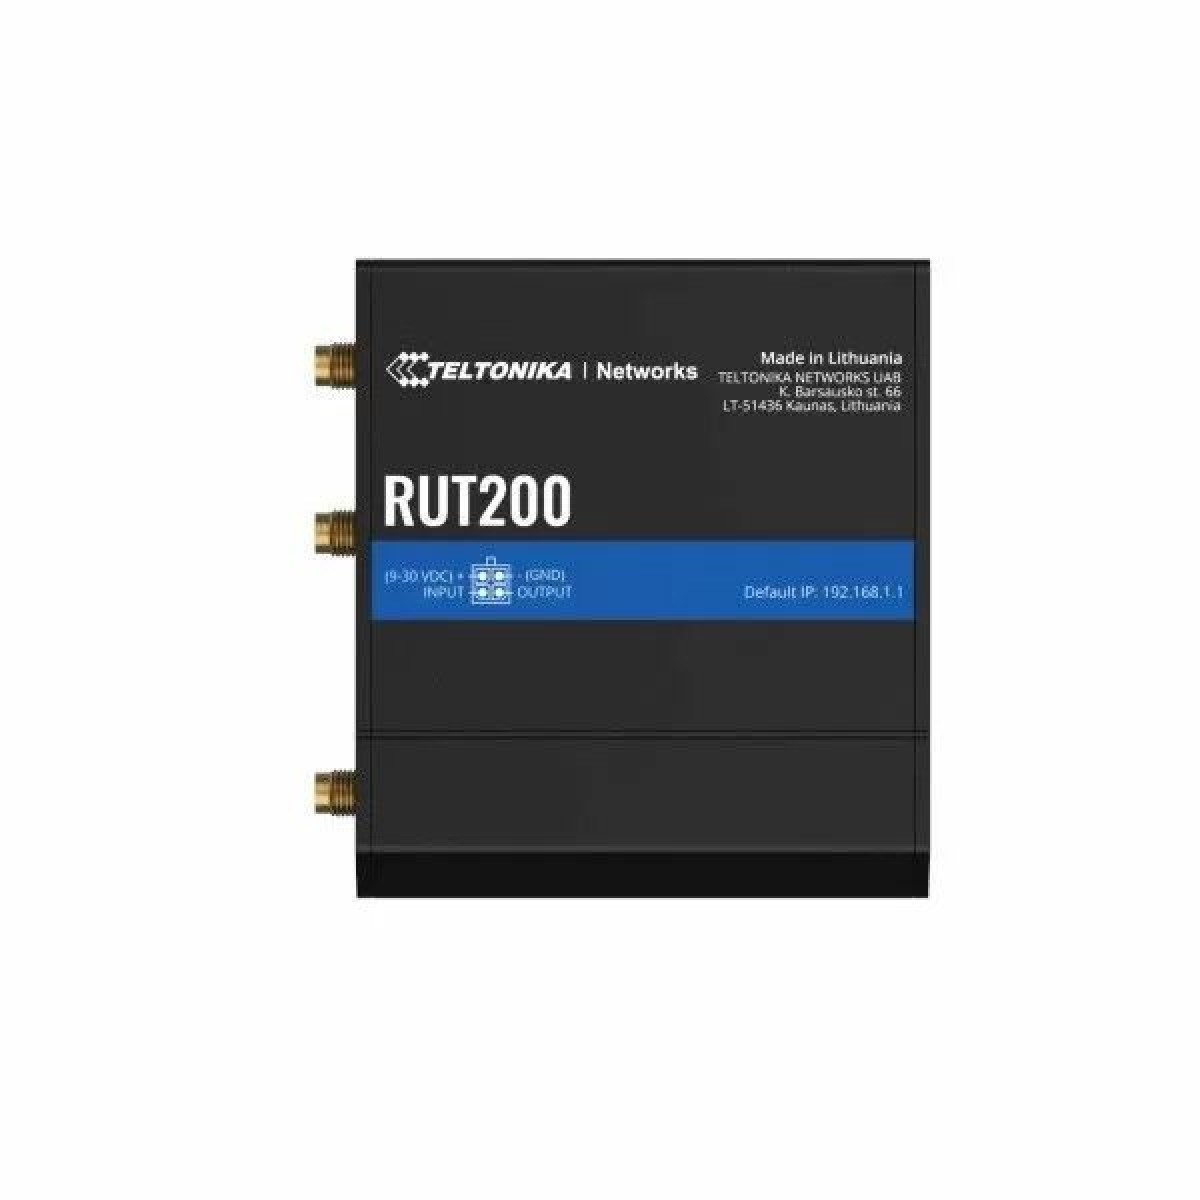 INDUSTRIAL CELLULAR ROUTER RUT200